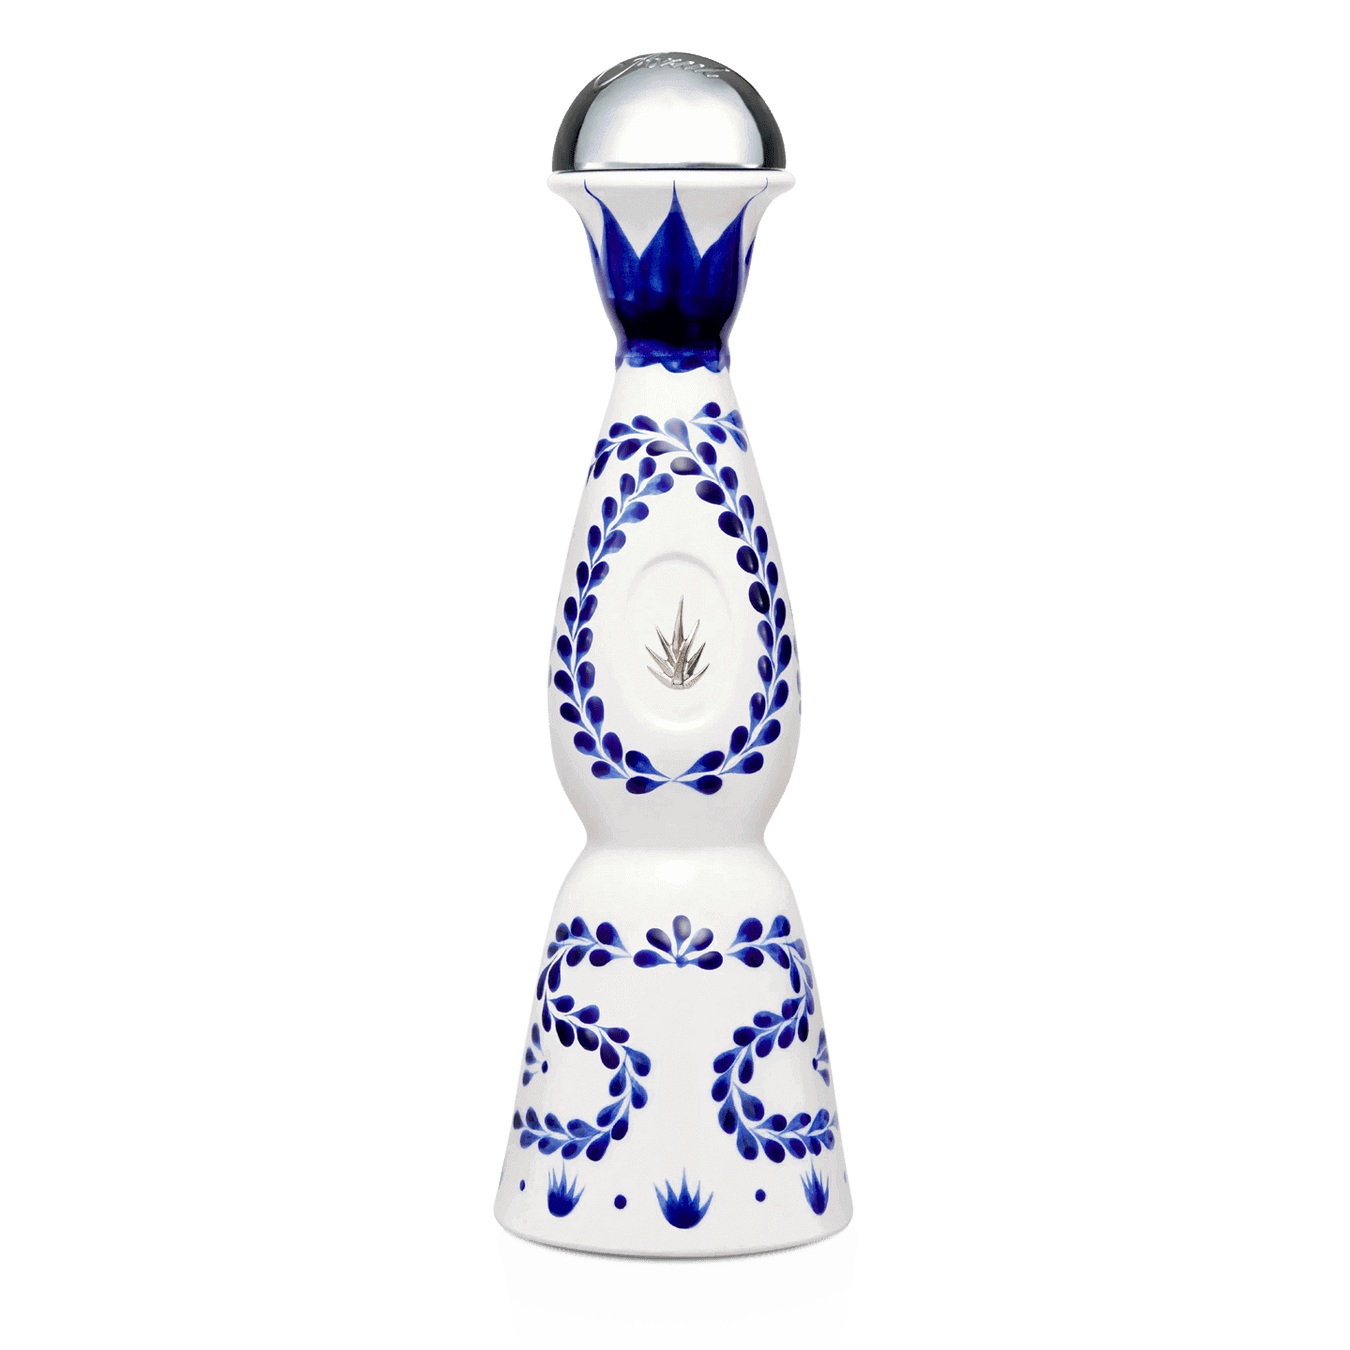 Clase Azul Tequila Collection, Tequila Clase Azul, Clase Azul Reposado Tequila, Clase Azul Blanco Tequila, Clase Azul Añejo Tequila, Buy Clase Azul Tequila.